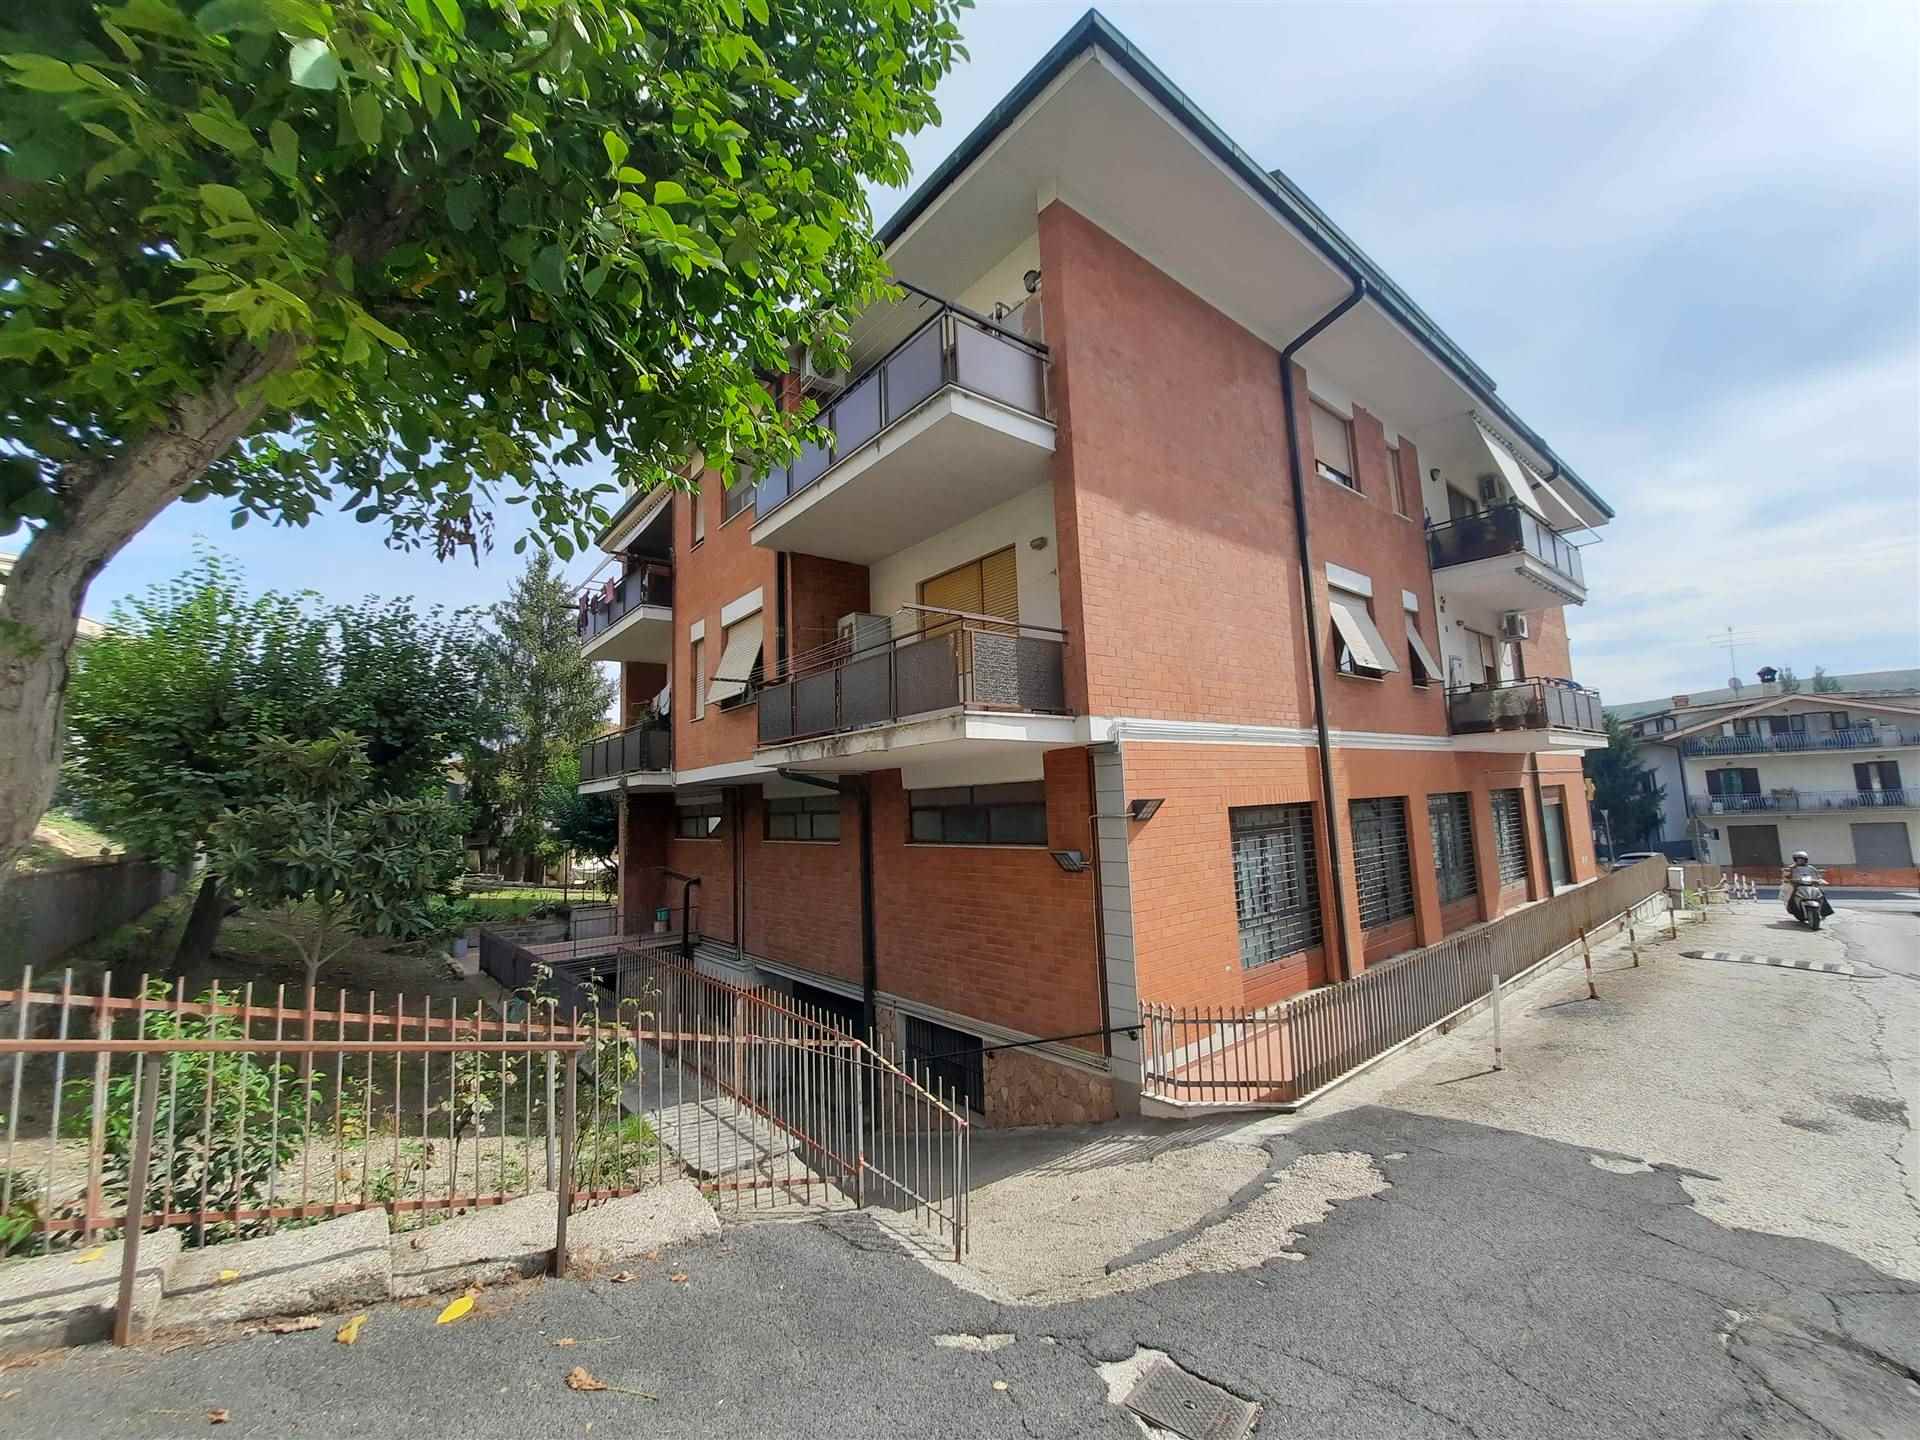 SANTA LUCIA, FONTE NUOVA, Apartment for sale of 100 Sq. mt., Good condition, Heating Individual heating system, Energetic class: G, placed at 2° on 2,